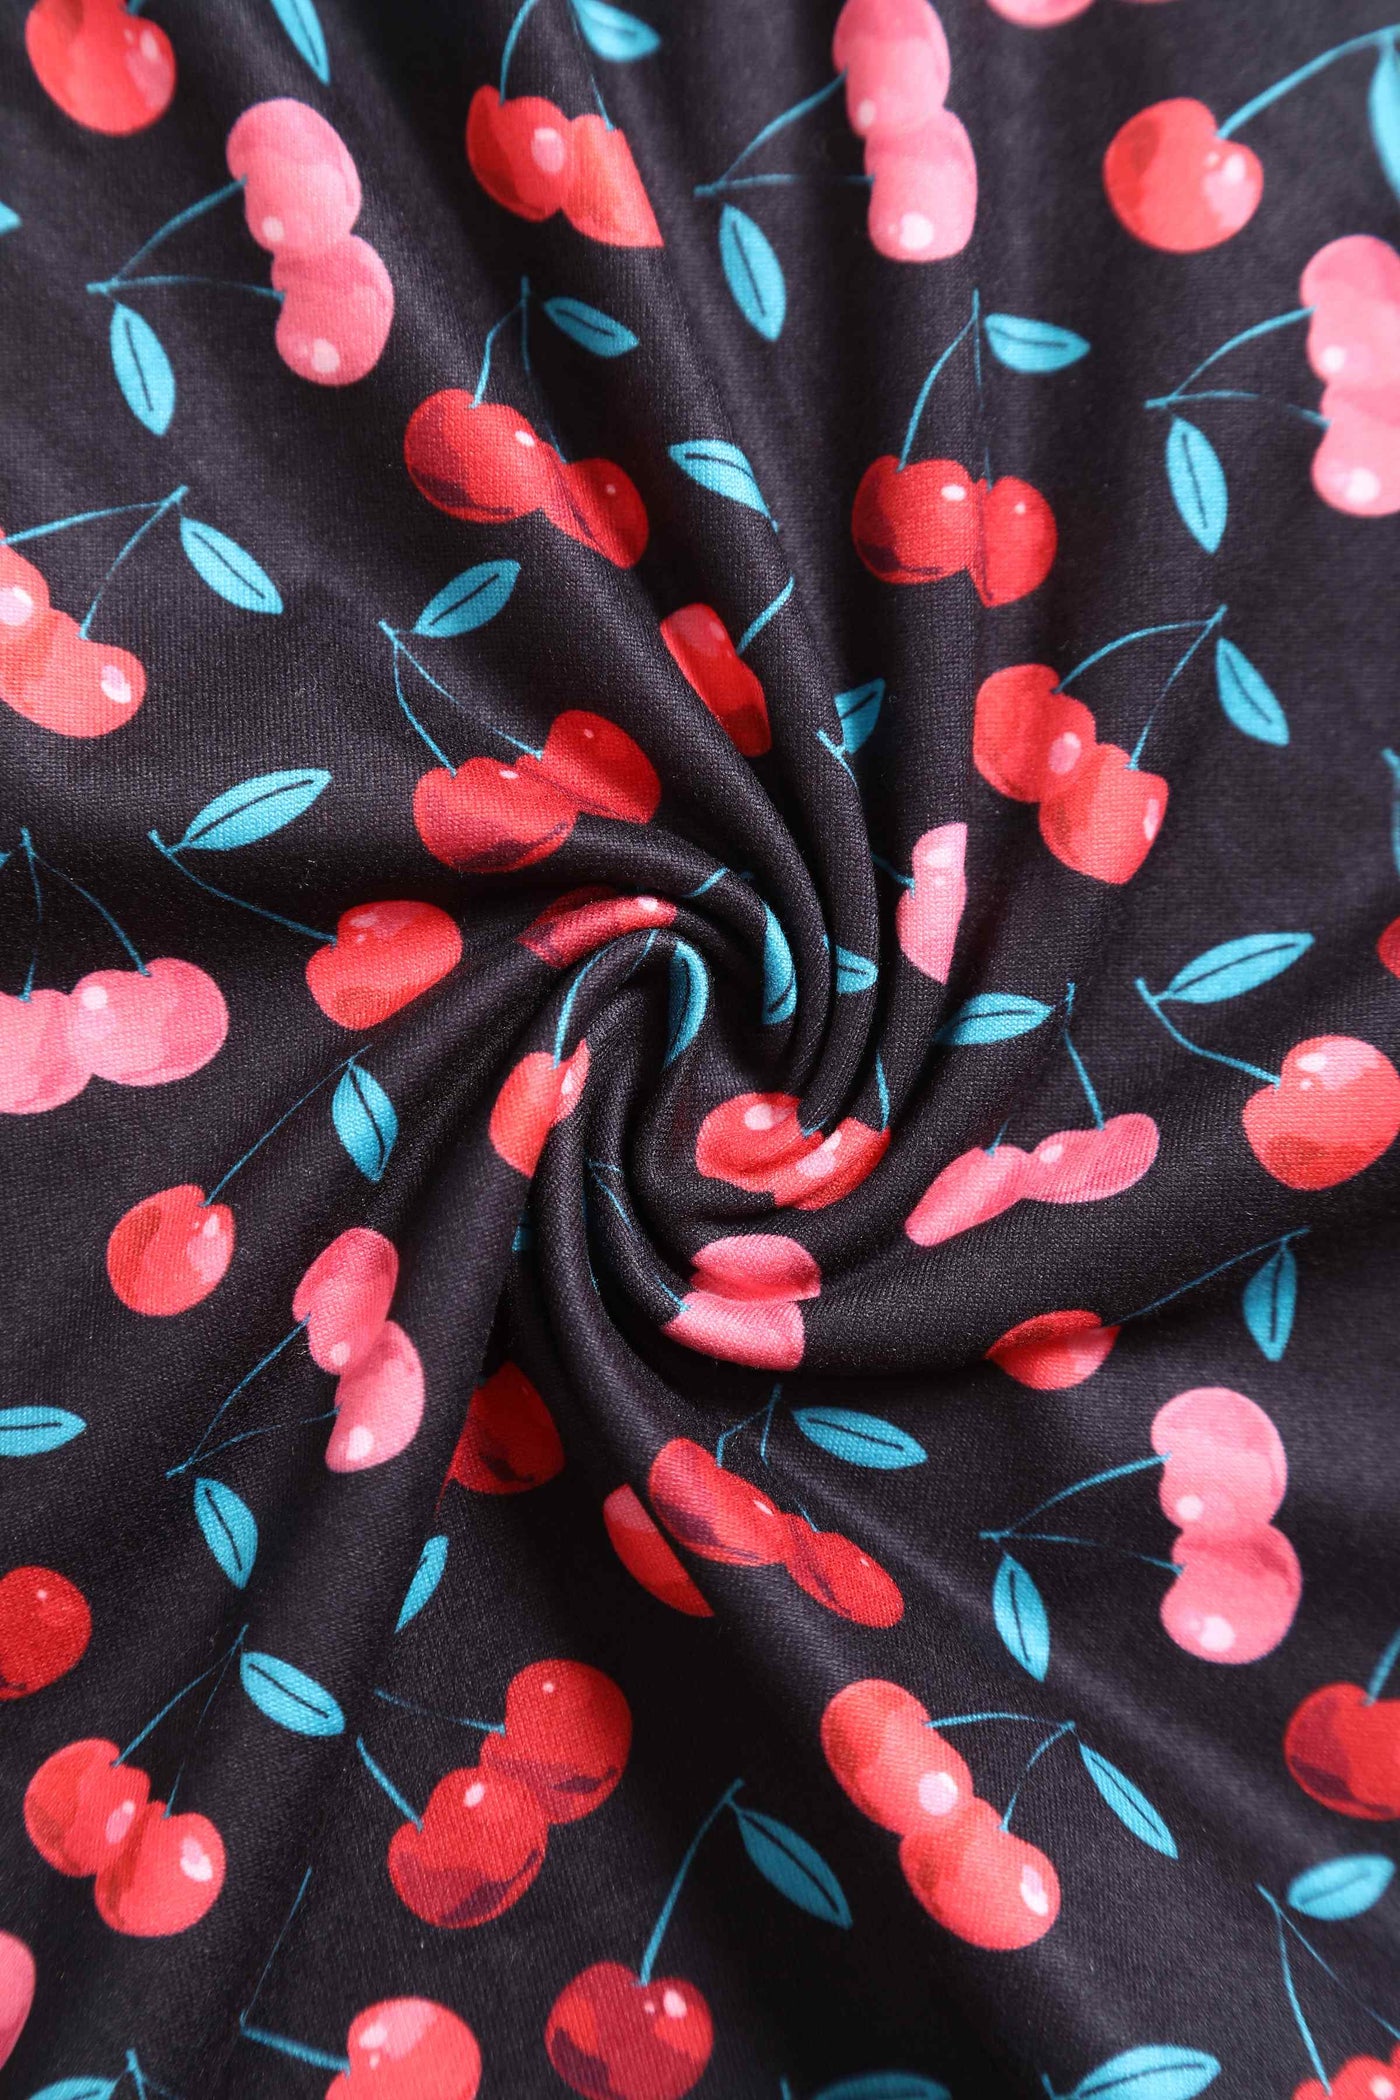 Close up View of Retro Cherry Print Crossover Bust Dress in Black